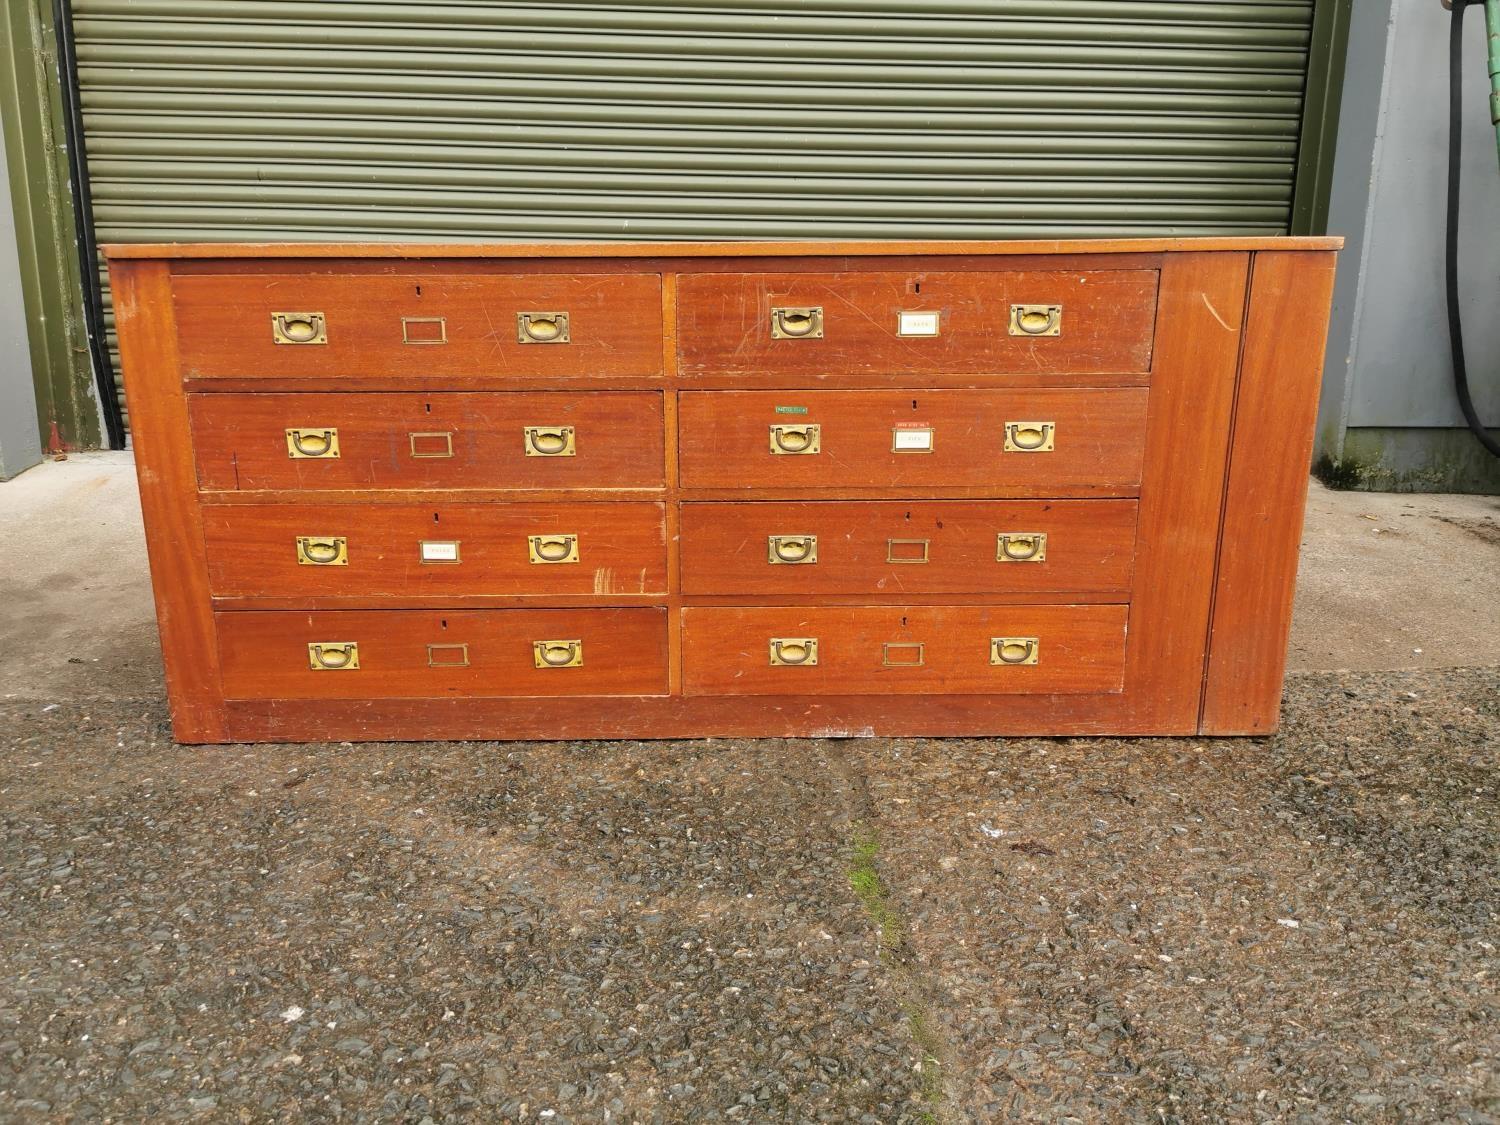 Early 20th C. mahogany haberdashery cabinet with eight drawers and brass handles {84 cm H x 194 cm W